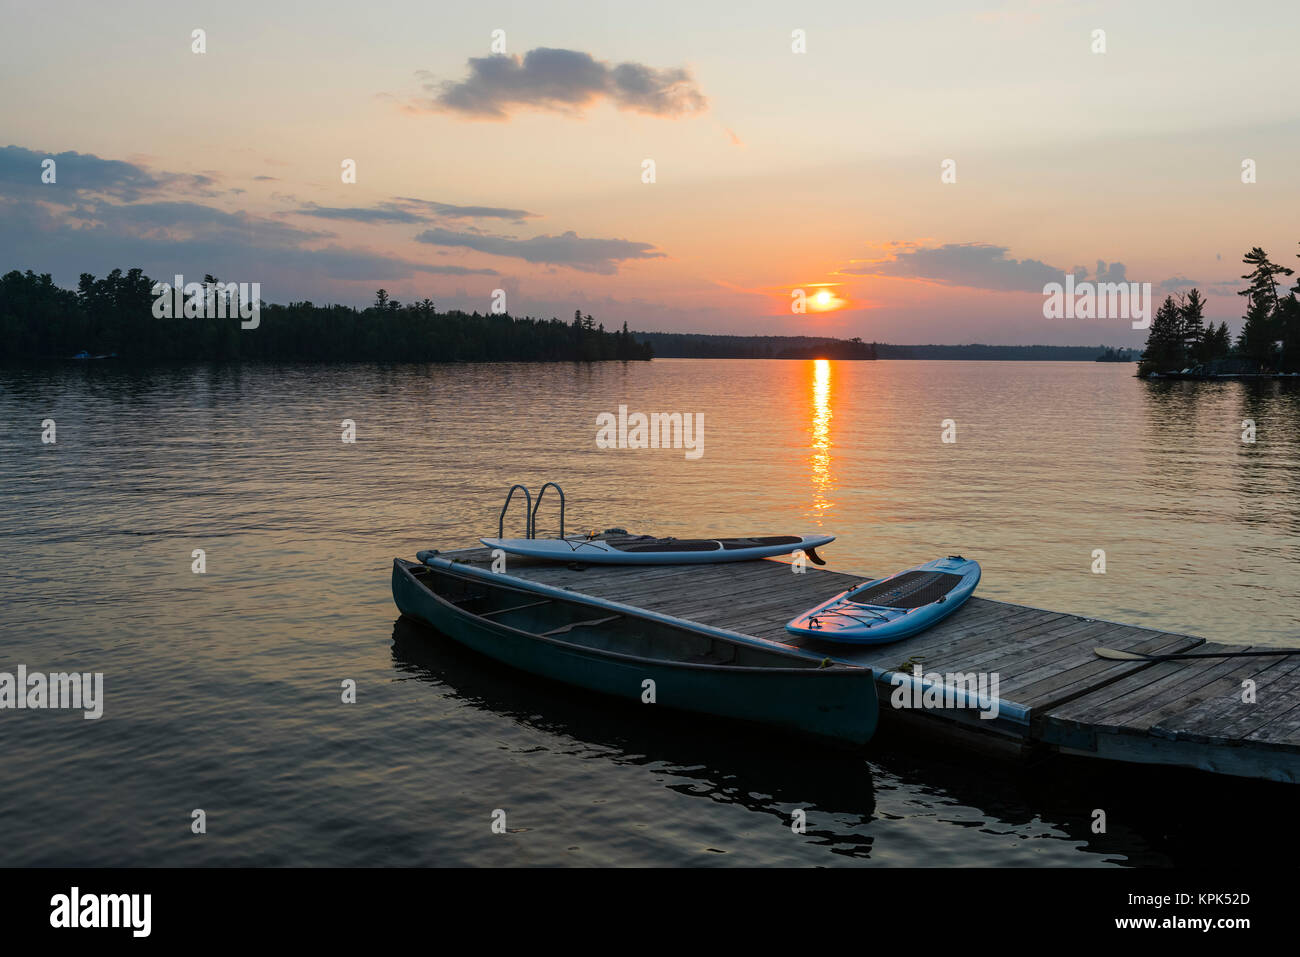 The sun setting over a tranquil lake with a dock, canoe and paddle boards in the foreground; Lake of the Woods, Ontario, Canada Stock Photo